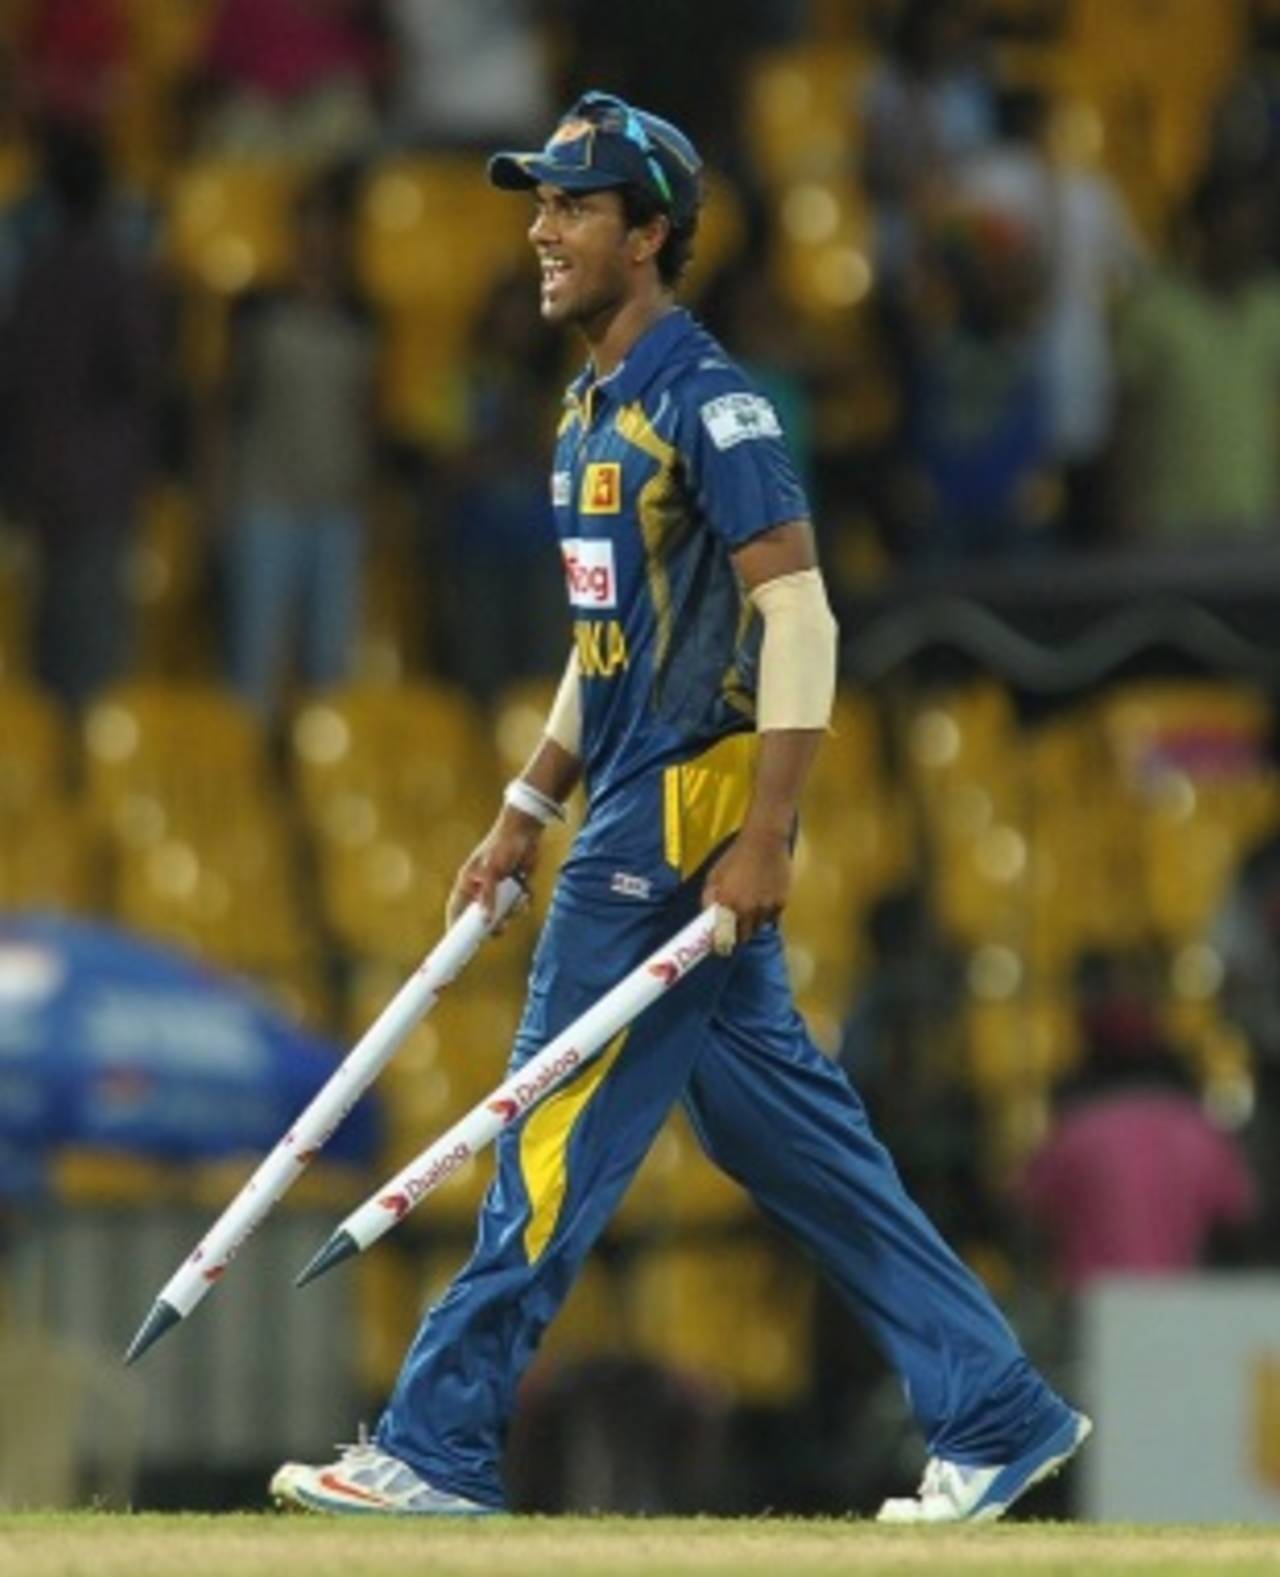 Dinesh Chandimal is all smiles after his side's win, Sri Lanka v South Africa, 1st ODI, Colombo, July 20, 2013